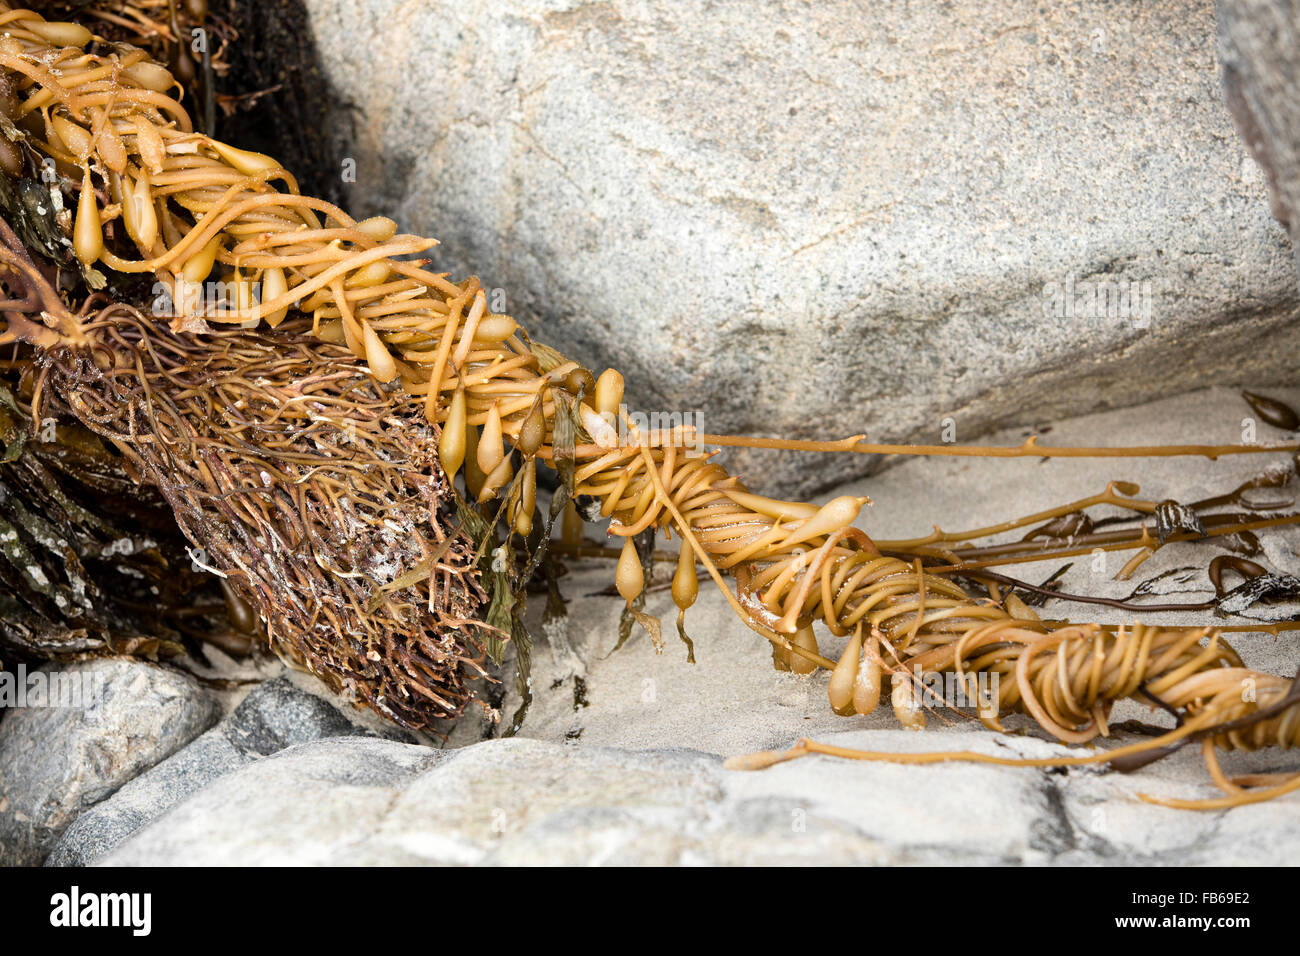 Twisted and knotted seaweed at Swami's Beach in Encinitas, California Stock Photo